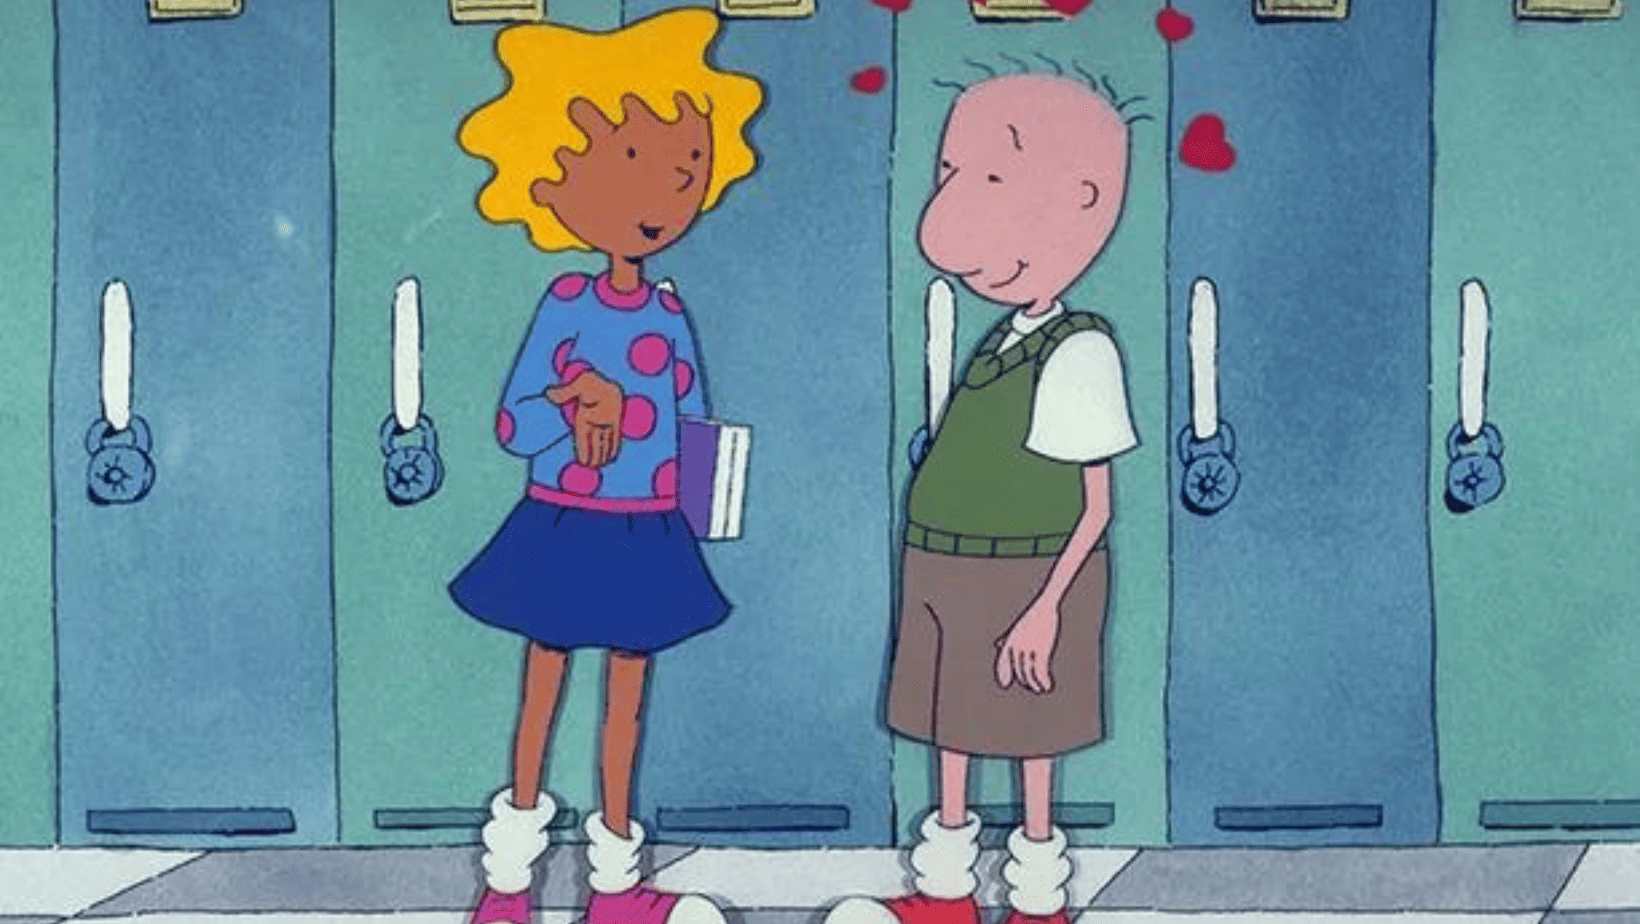 A young animated couple stands in front of lockers in this image from Jumbo Pictures.